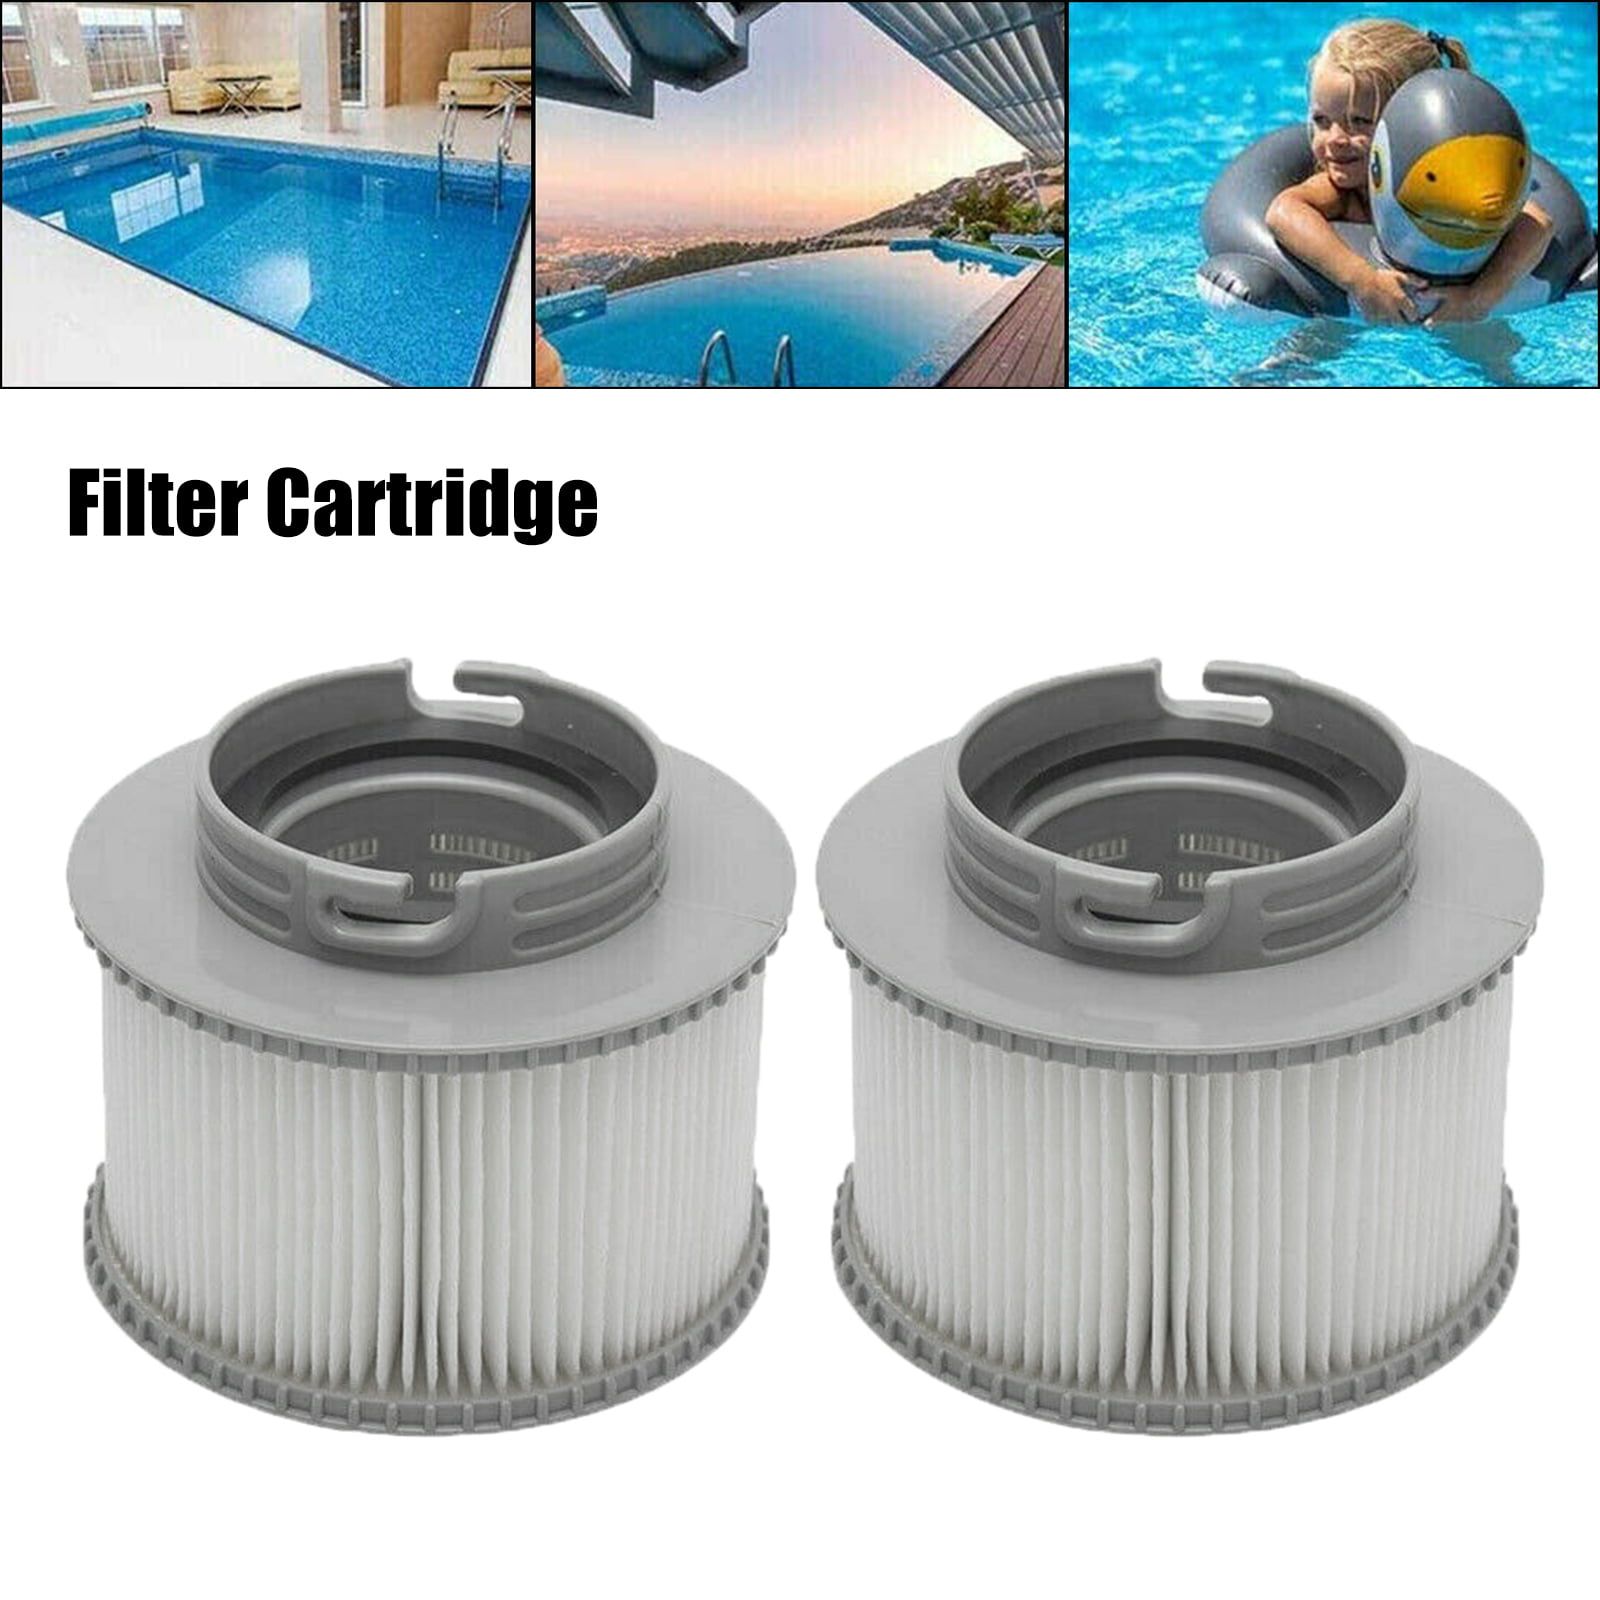 4Pcs MSPA FD2089 Filter Cartridge for Inflatable Swimming Pool Spa Hot Tub